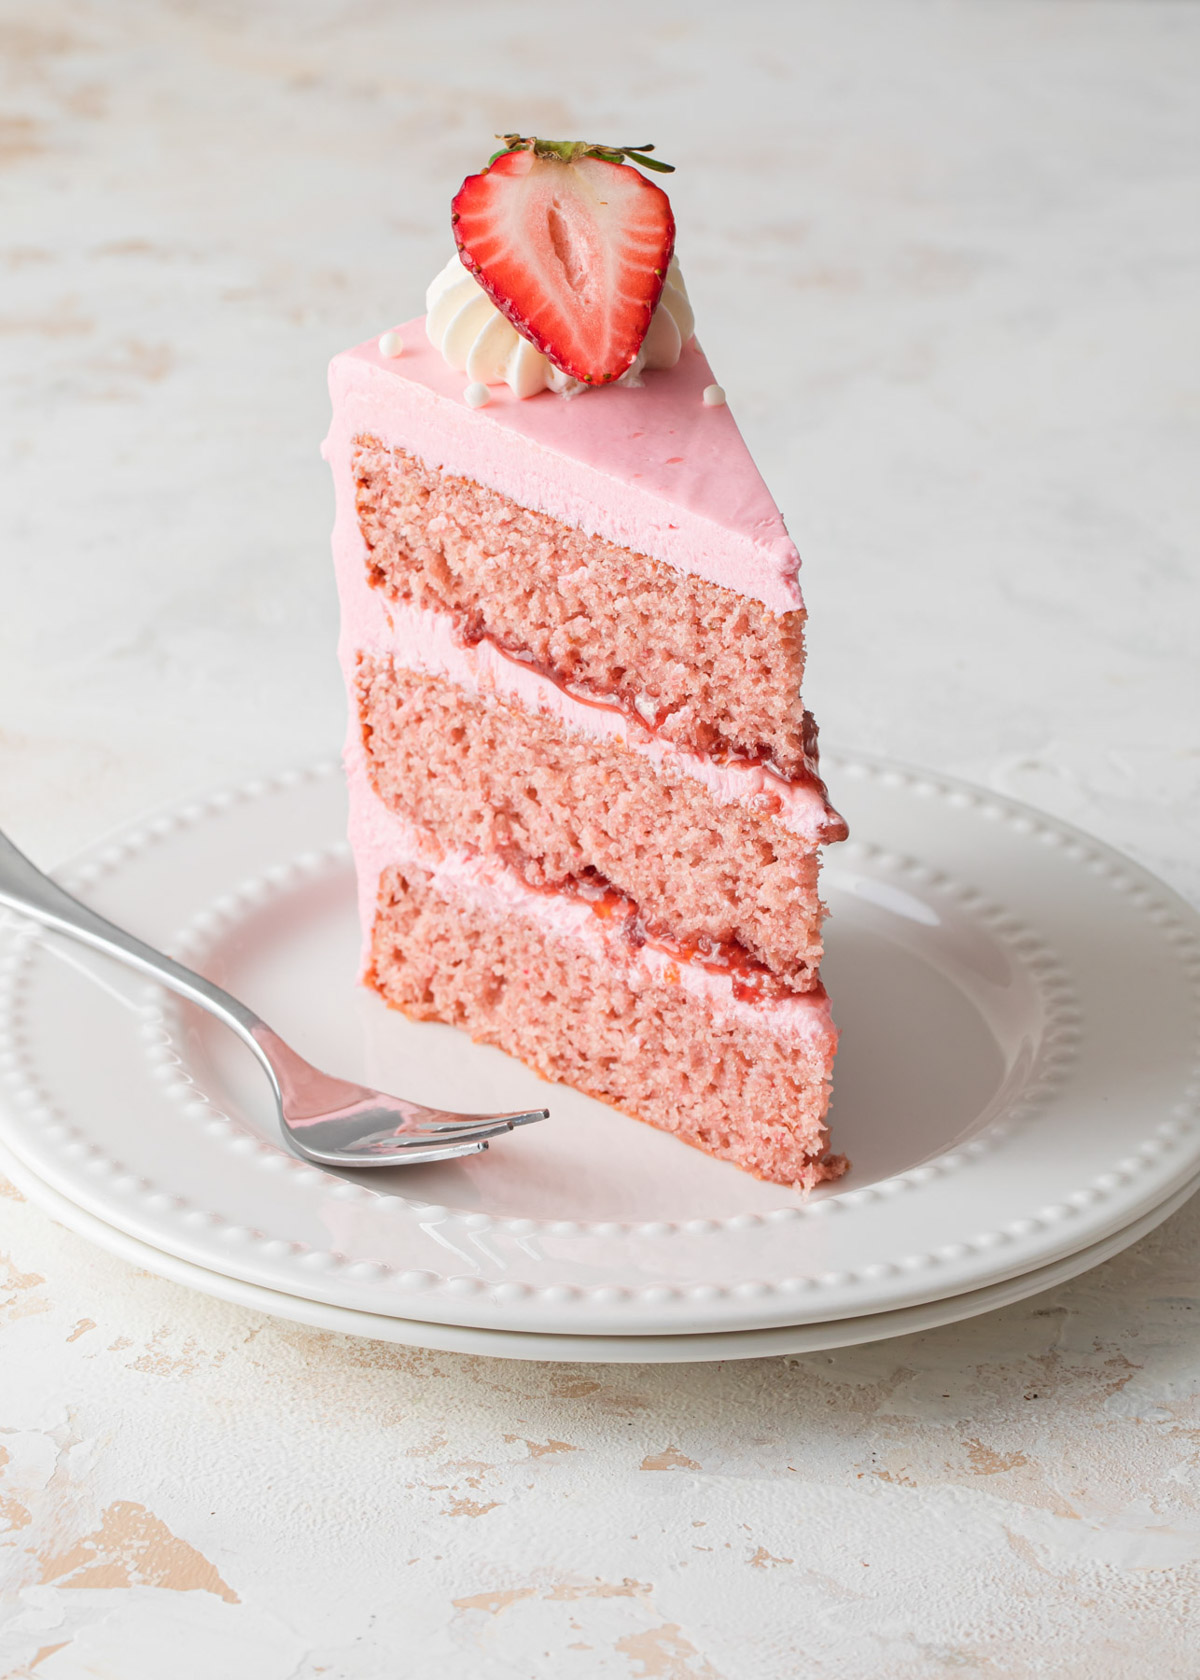 A slice of three-layer strawberry cake with jam filling and pink frosting